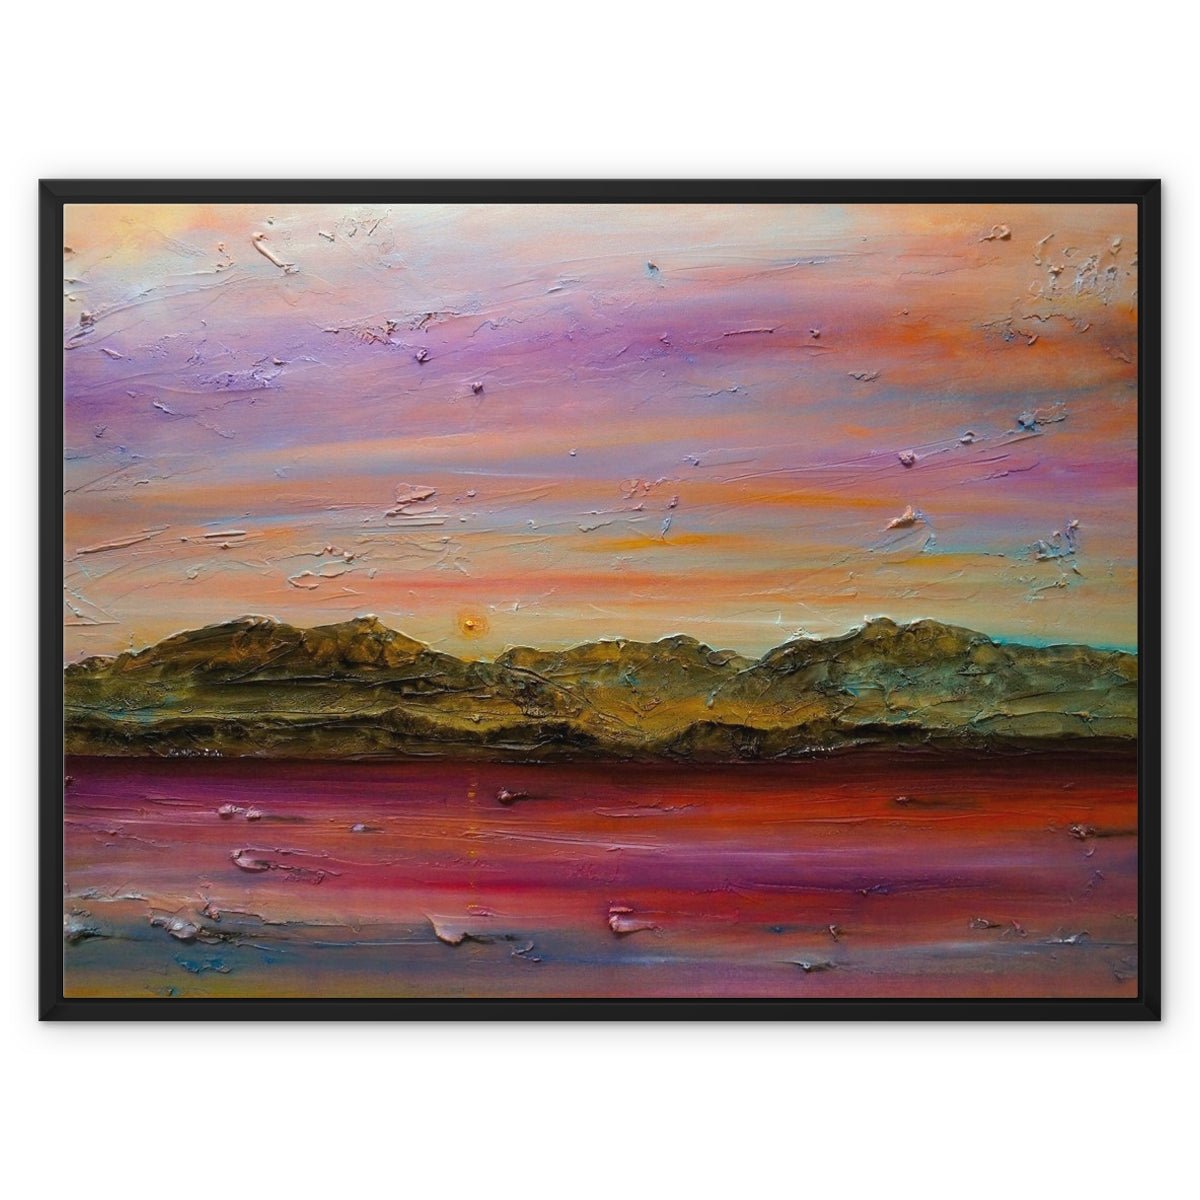 Arran Autumn Dusk Painting | Framed Canvas-Floating Framed Canvas Prints-Arran Art Gallery-32"x24"-Black Frame-Paintings, Prints, Homeware, Art Gifts From Scotland By Scottish Artist Kevin Hunter